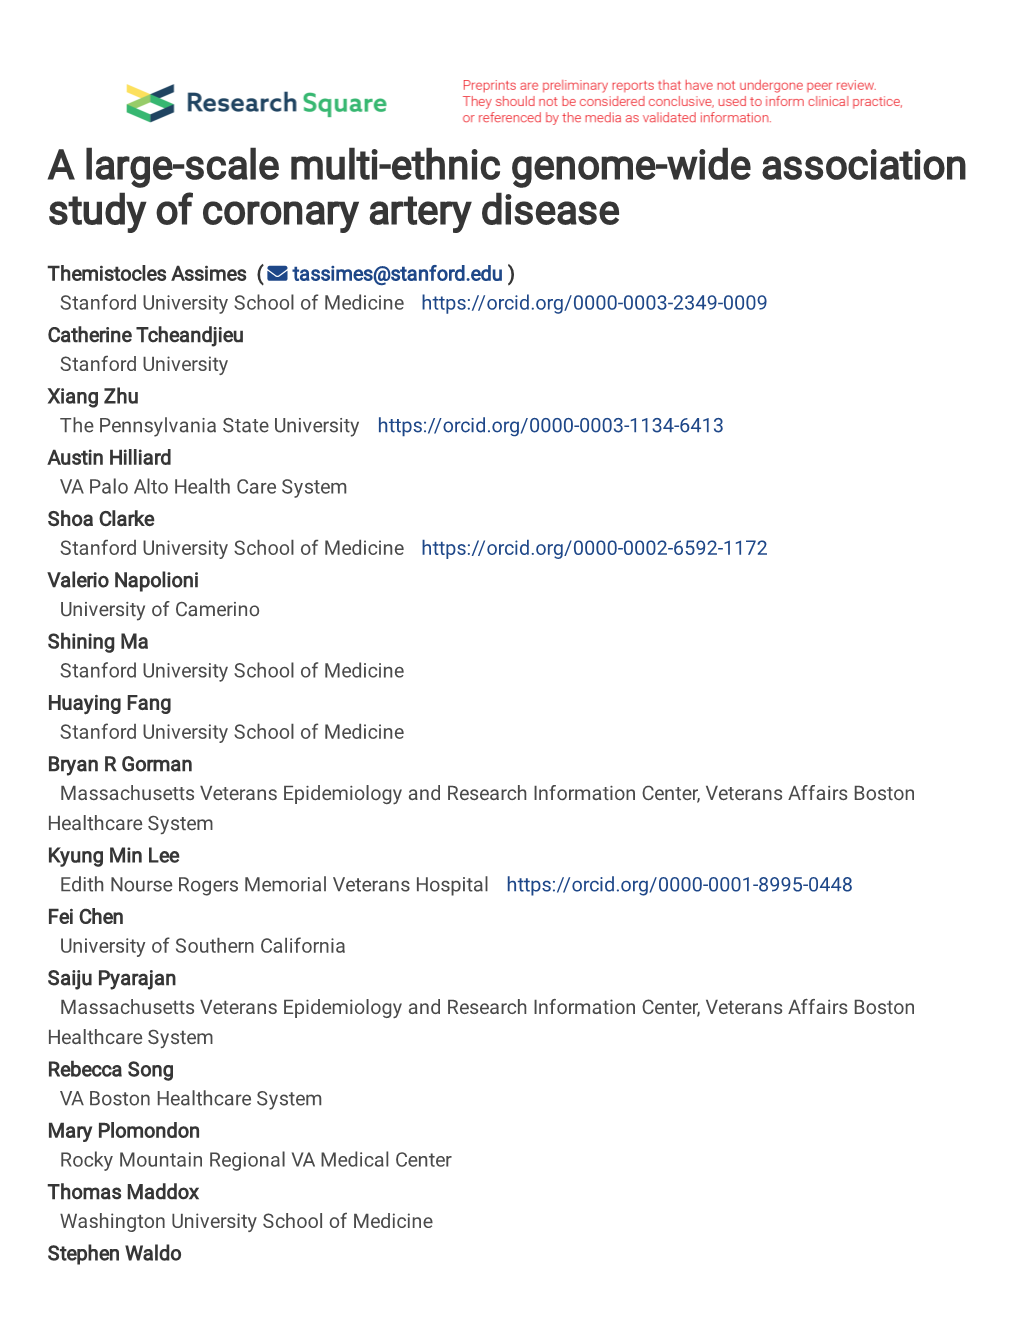 A Large-Scale Multi-Ethnic Genome-Wide Association Study of Coronary Artery Disease